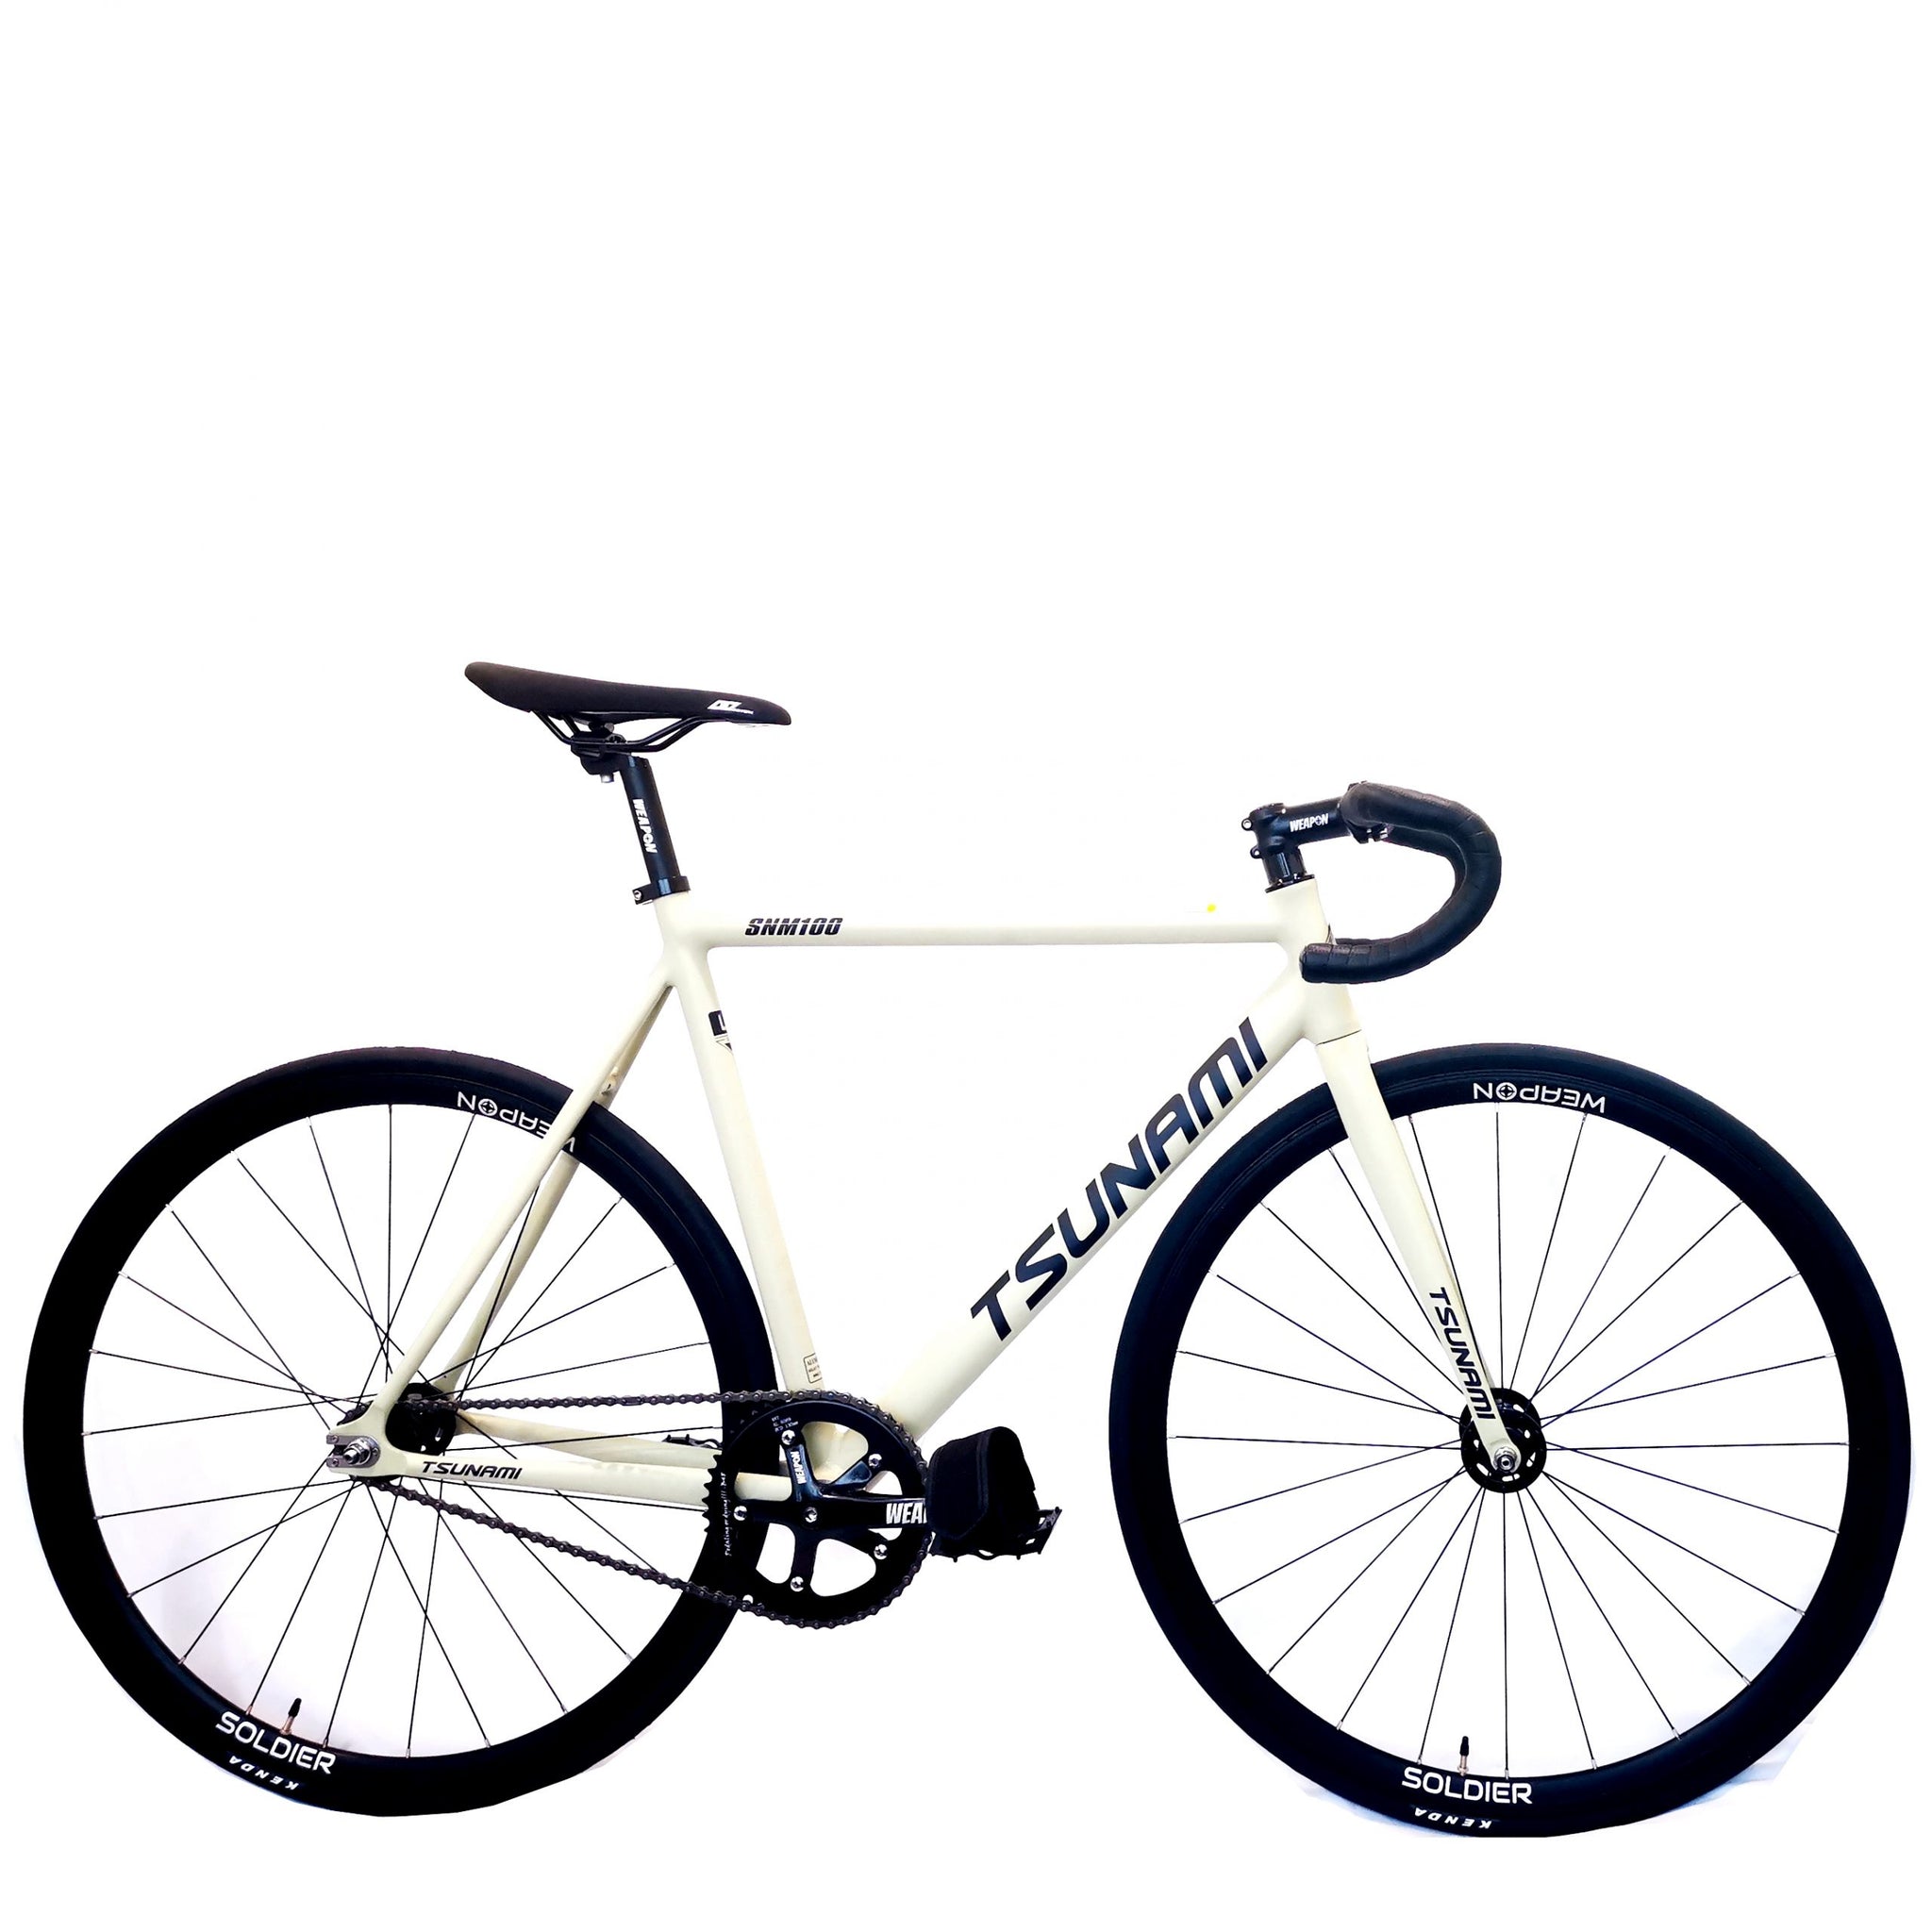 Tsunami SNM100 2021 Cream Complete Bicycles 825.00 Atelier Olympia